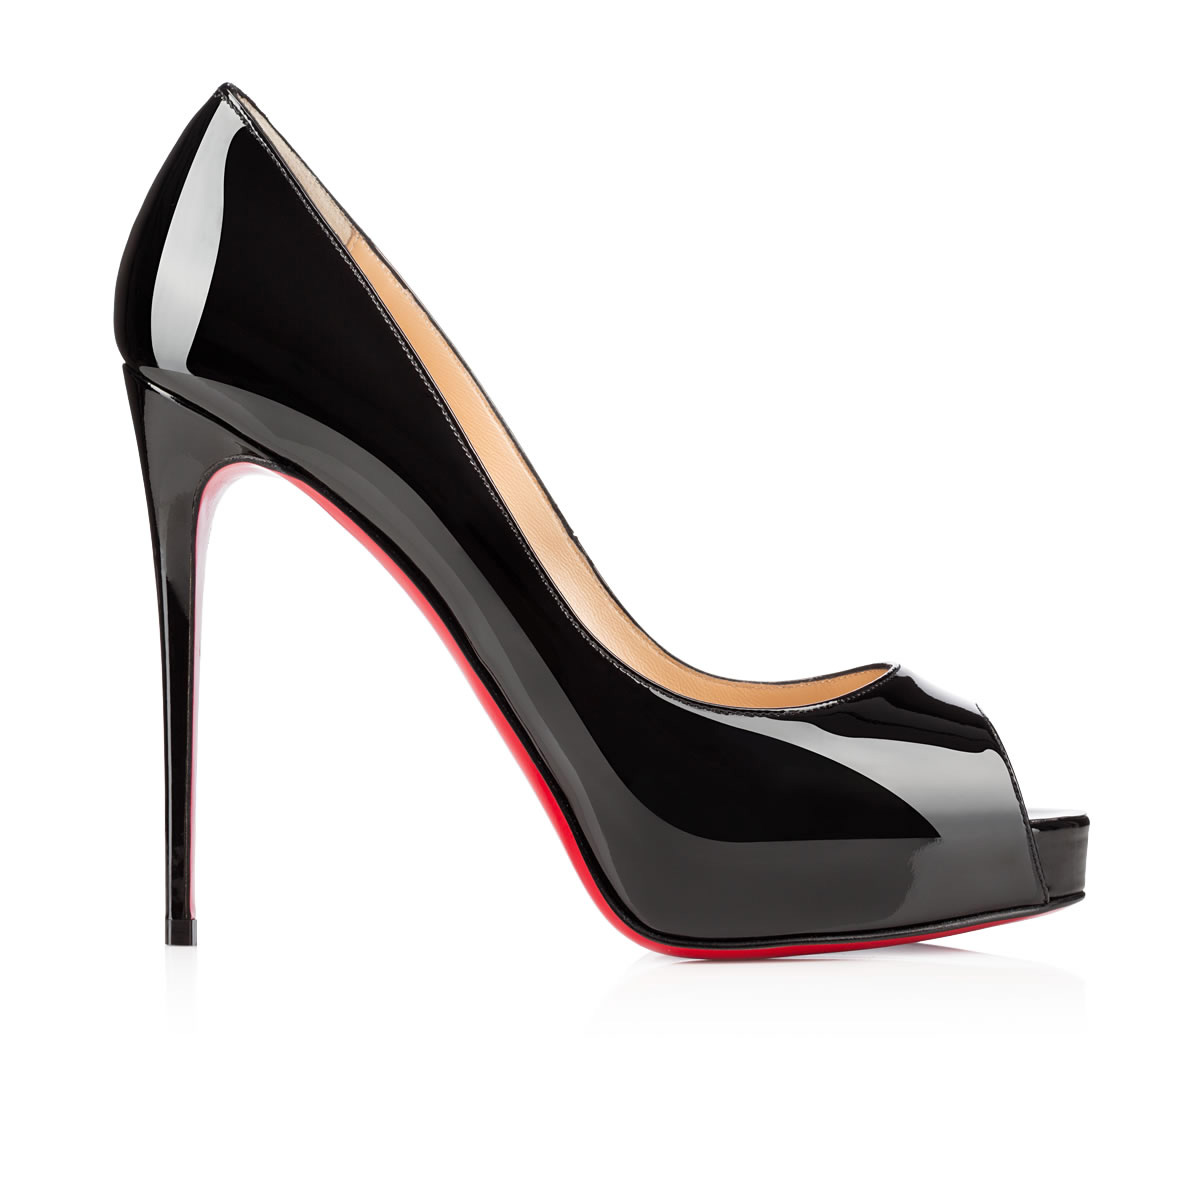 Christian Louboutin “Follies Spiked” Patent Pumps  Christian louboutin  shoes, Black pumps heels, Black high heels shoes